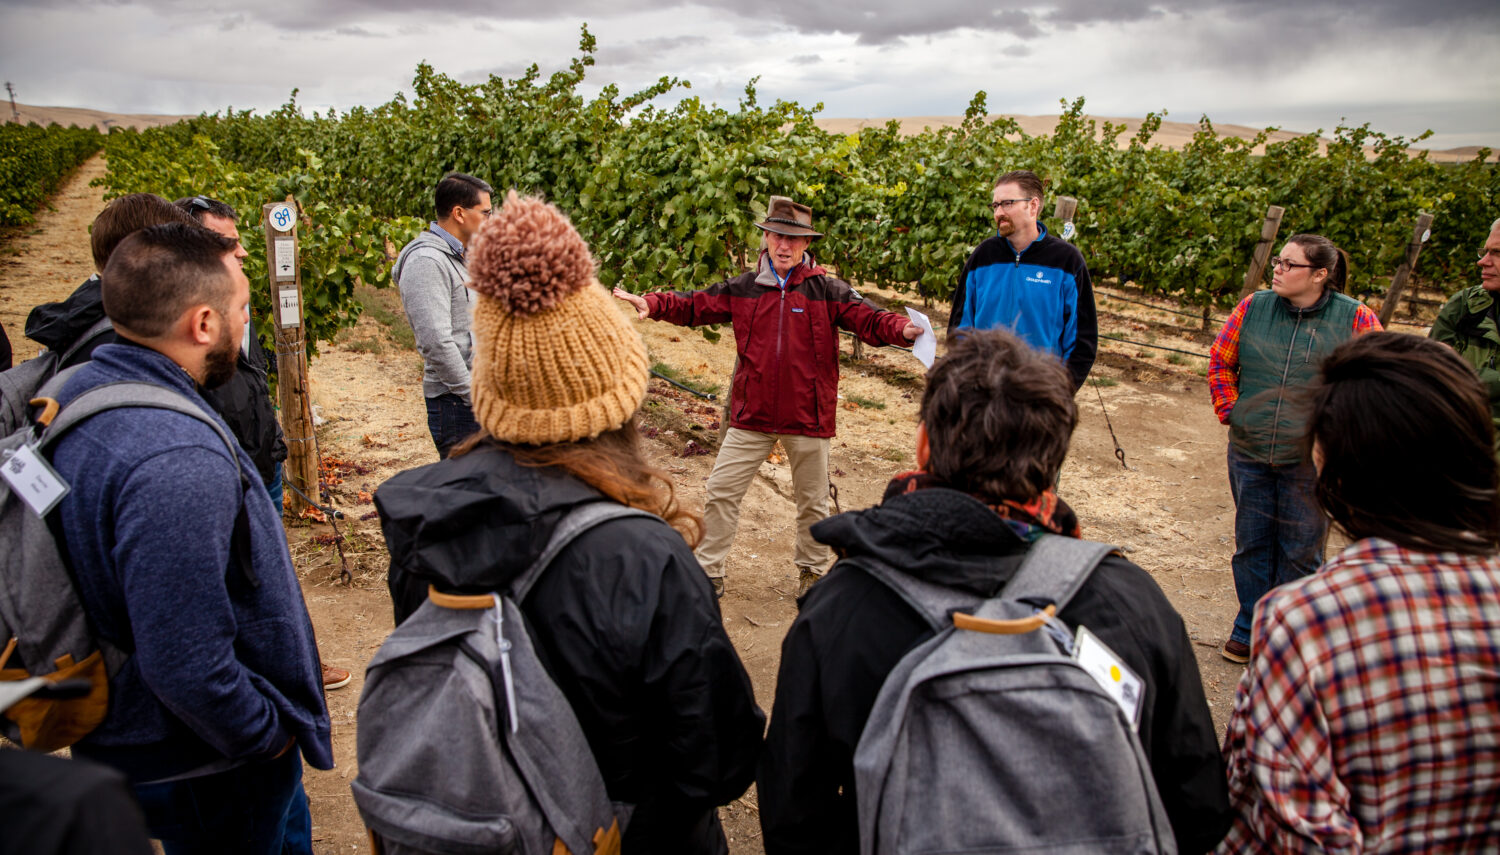 A man in a hat and red jacket is talking to a group of people in a circle. They stand in front of rows of grape vines and the sky is overcast.